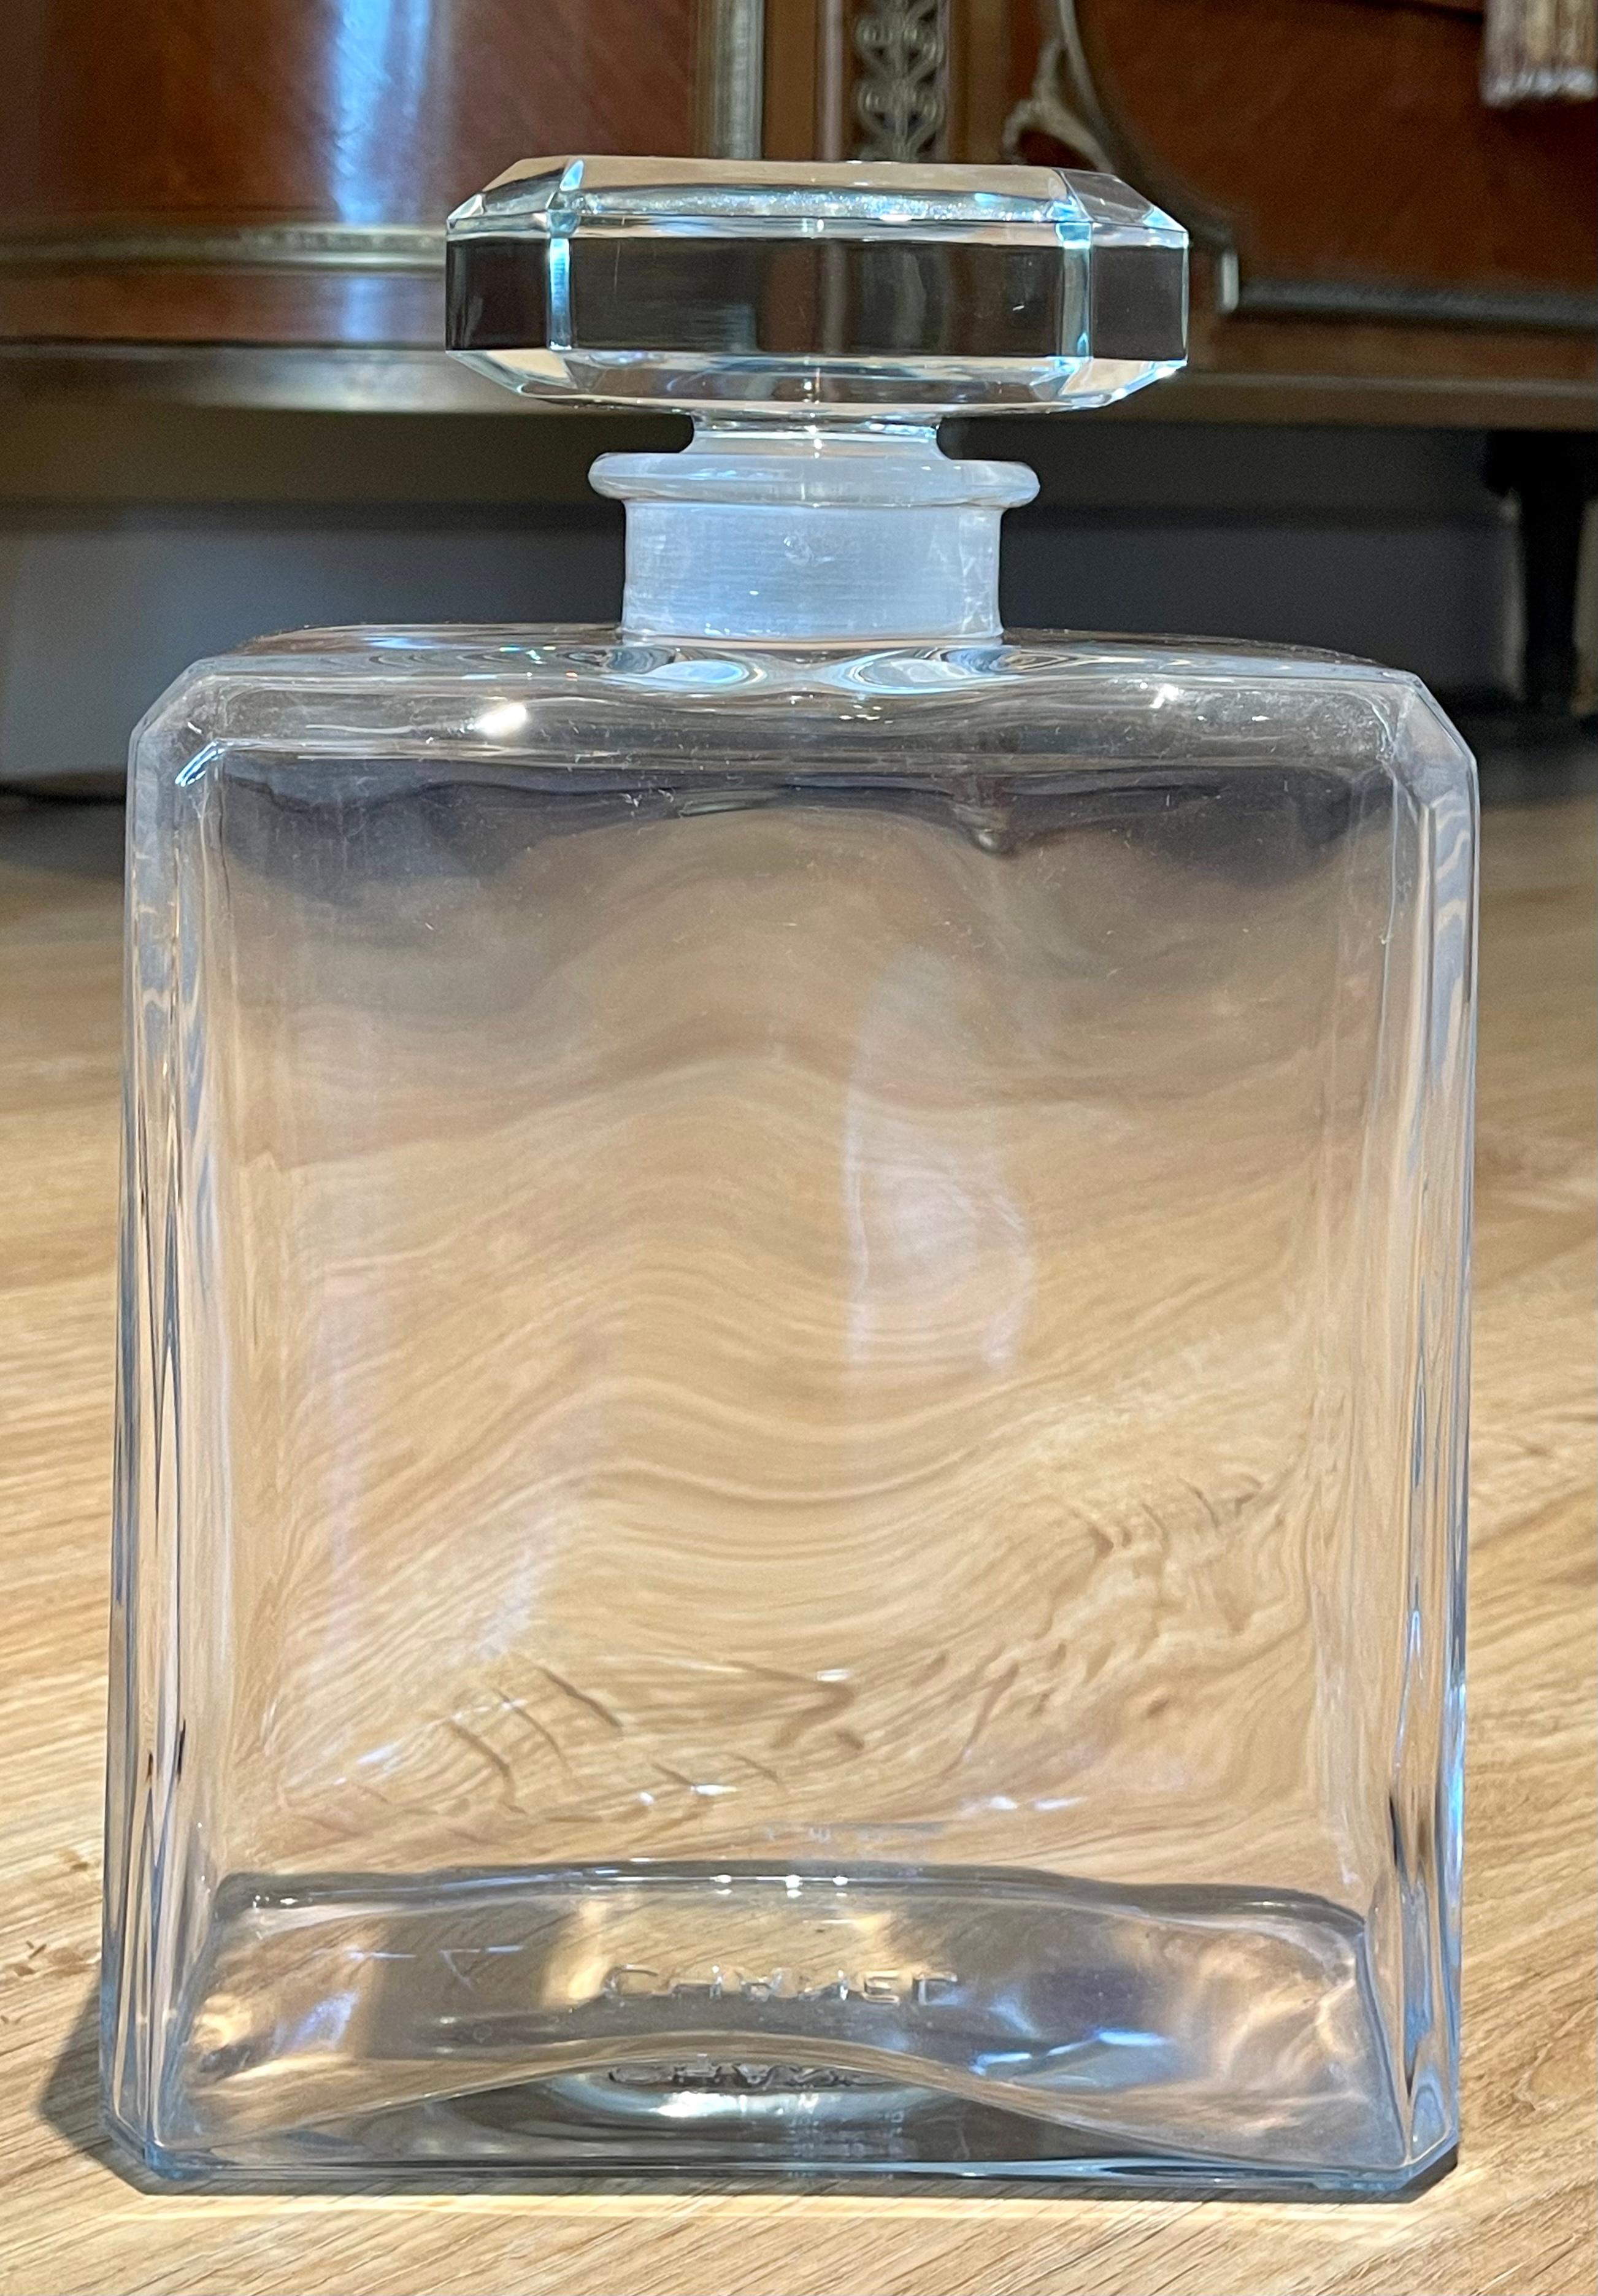 Chanel number 5 perfume dummy in empty glass but in perfect condition.

Dimensions
Total height 27cm
Bottle height 20cm
Width 18cm
Depth 8cm